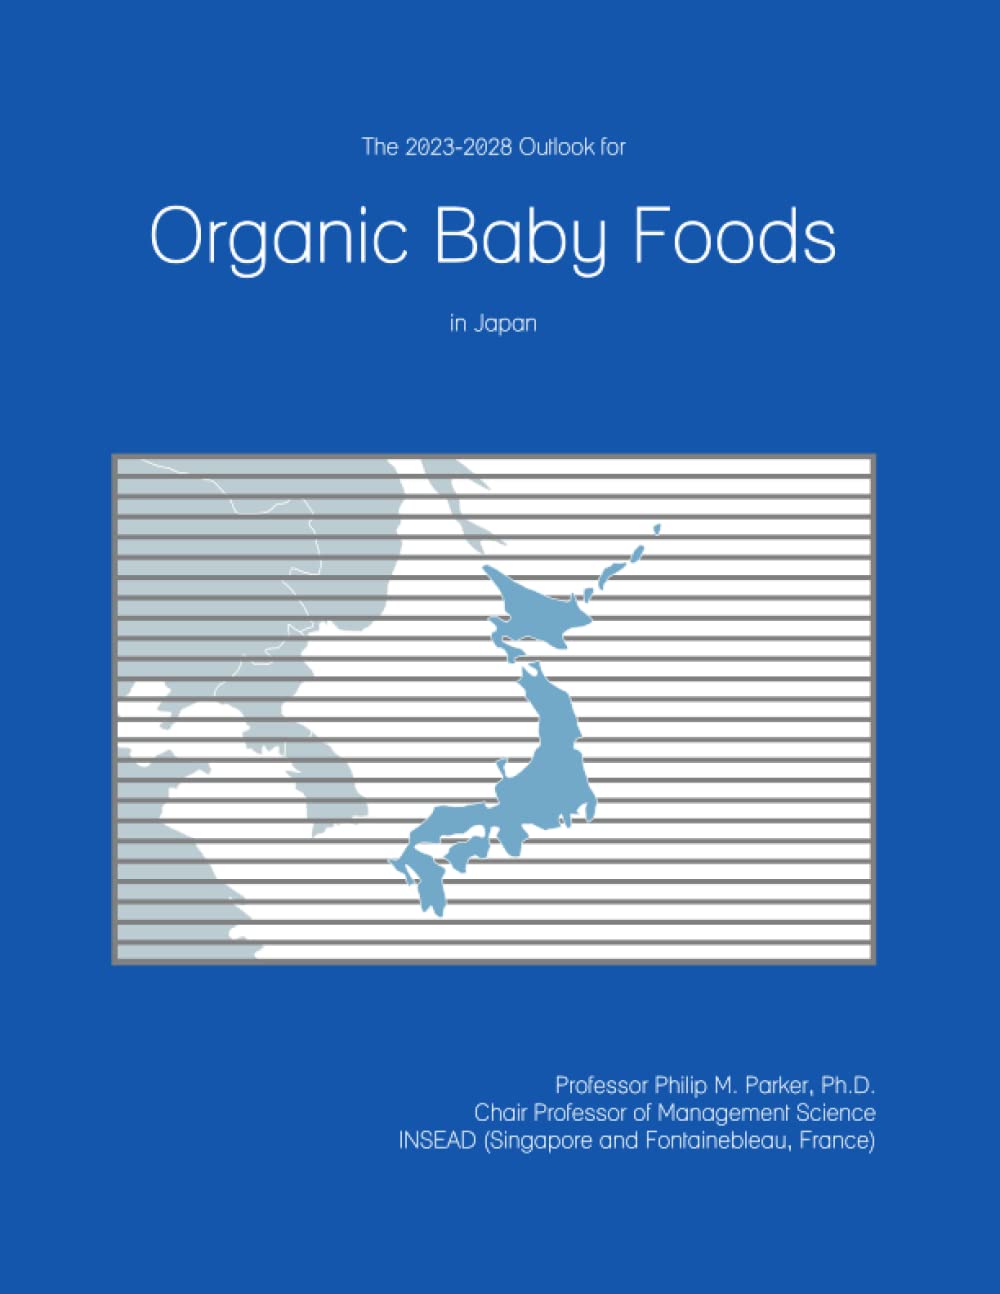 The 2023-2028 Outlook for Organic Baby Foods in Japan